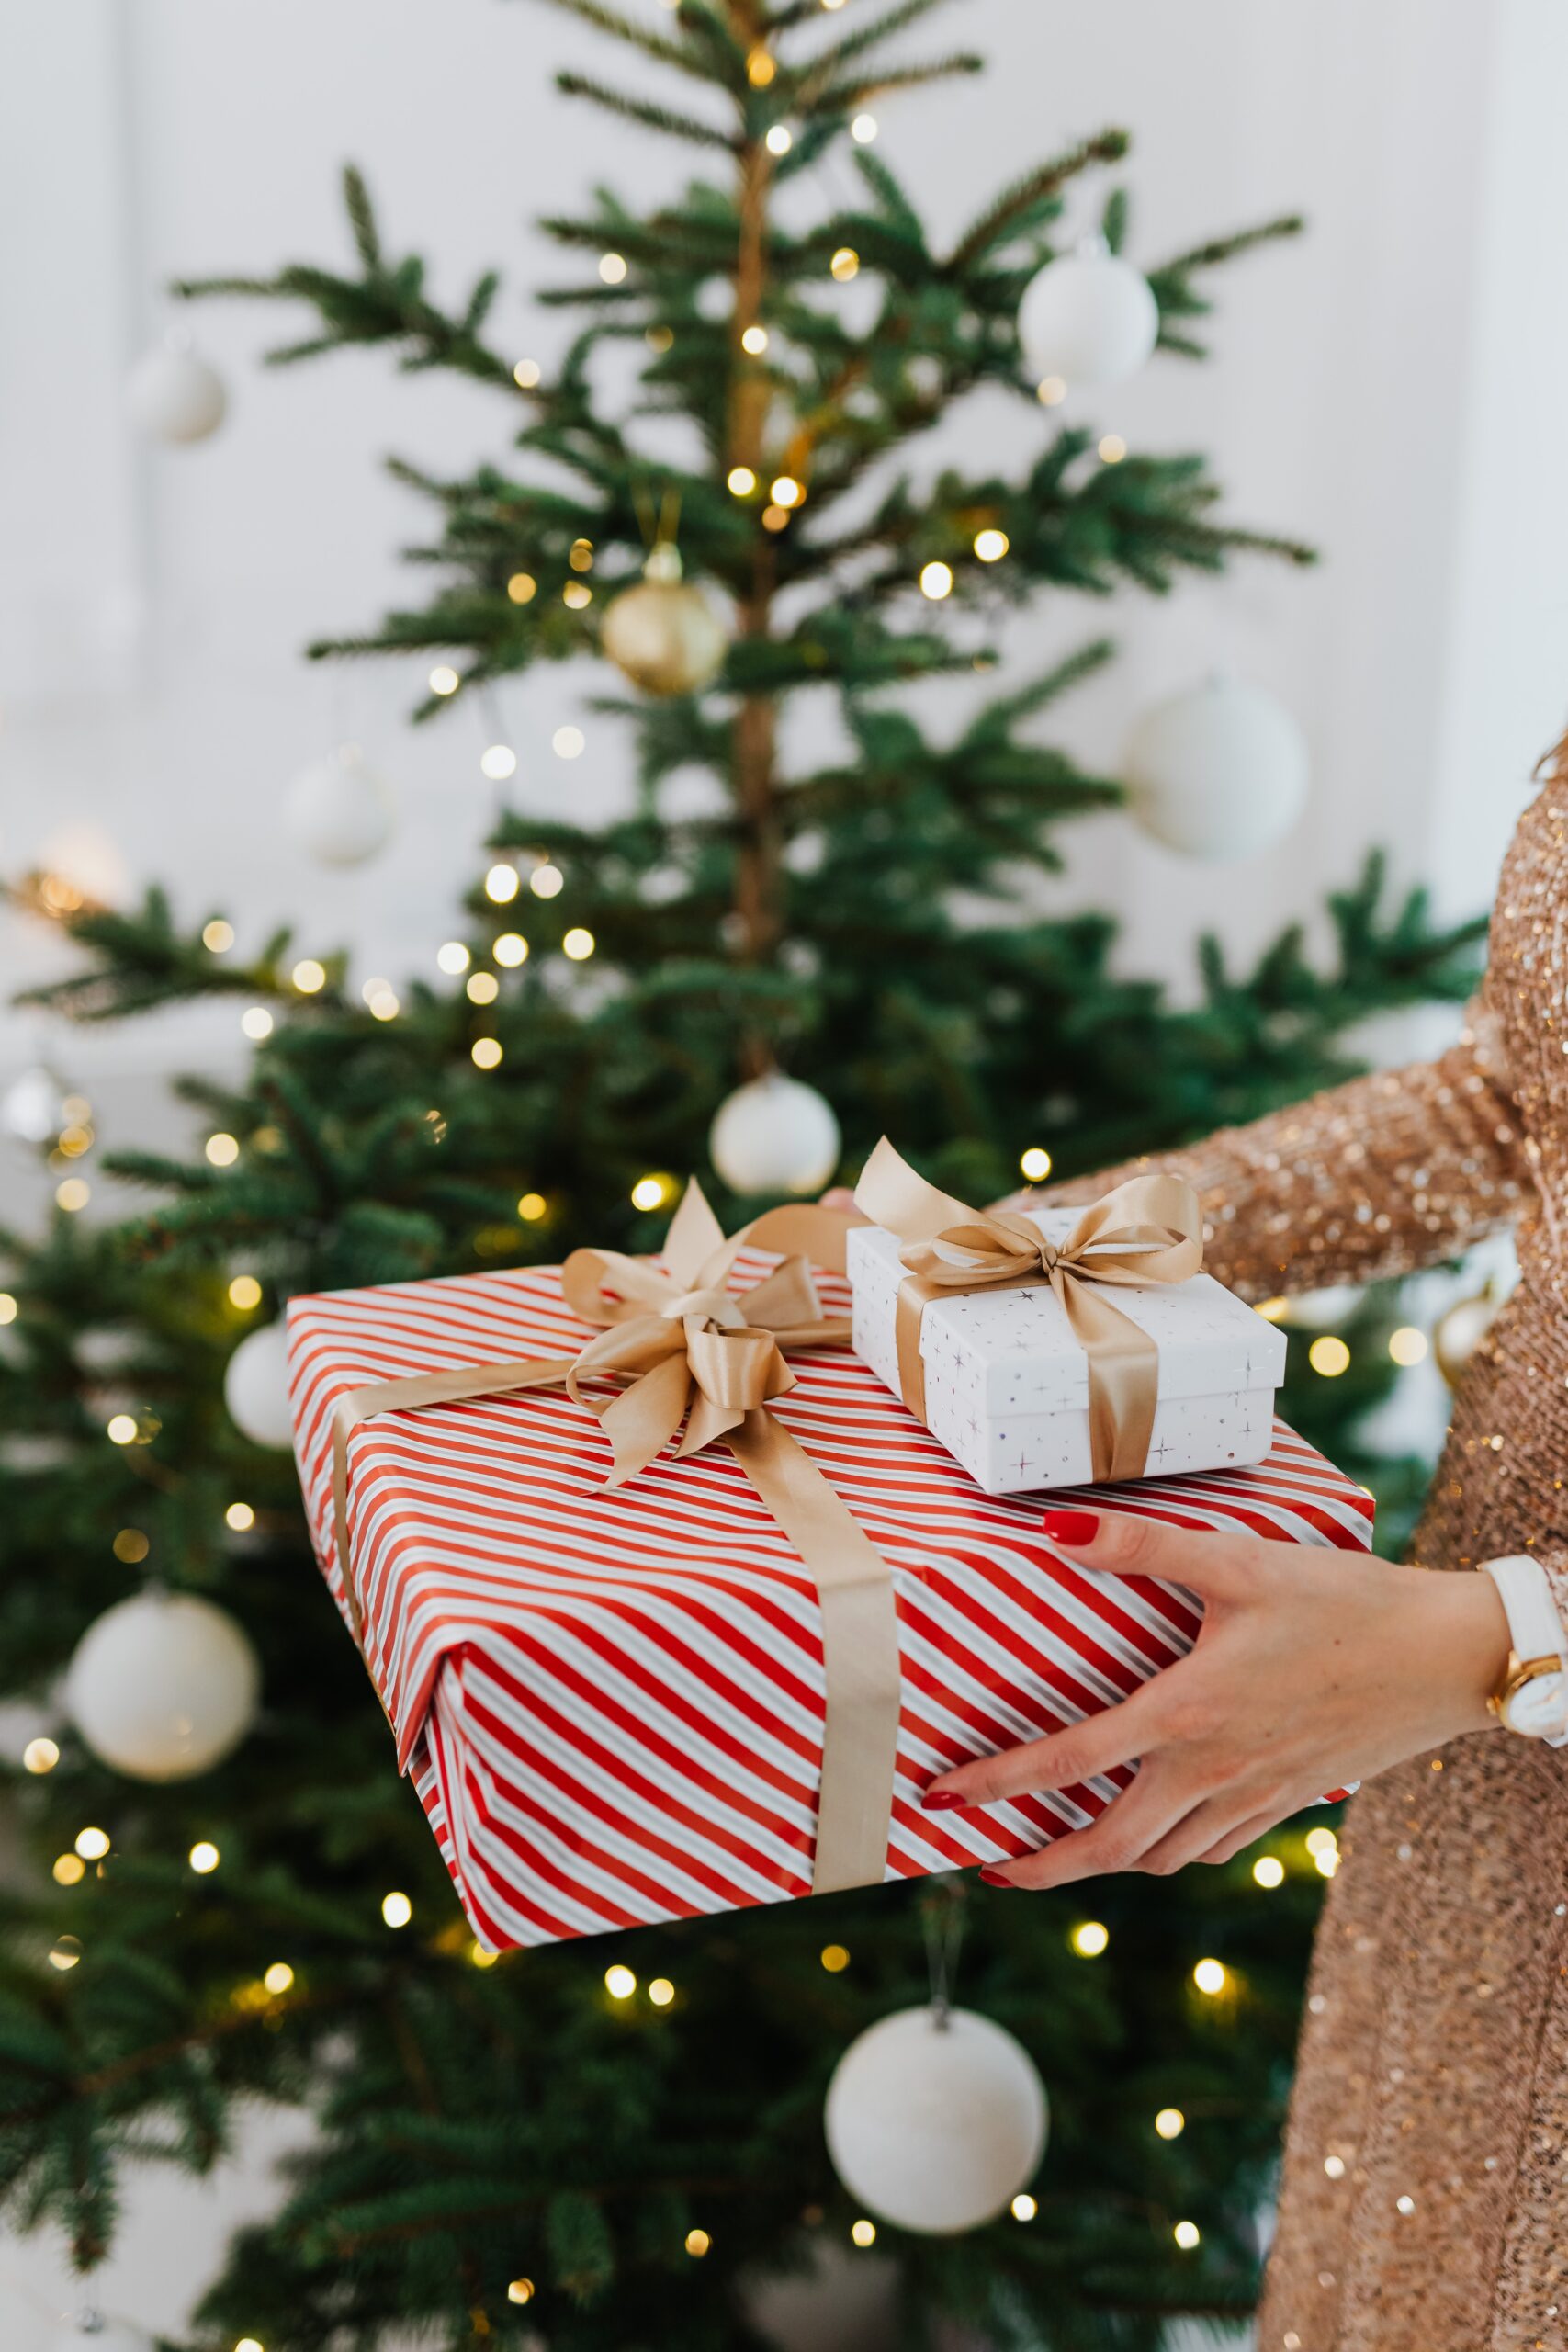 Close-up image of a woman with a red manicure holding a large gift box with red and white striped wrapping paper and a gold ribbon. A smaller white box with a white ribbon sits on top. A Christmas tree can be seen in the background.